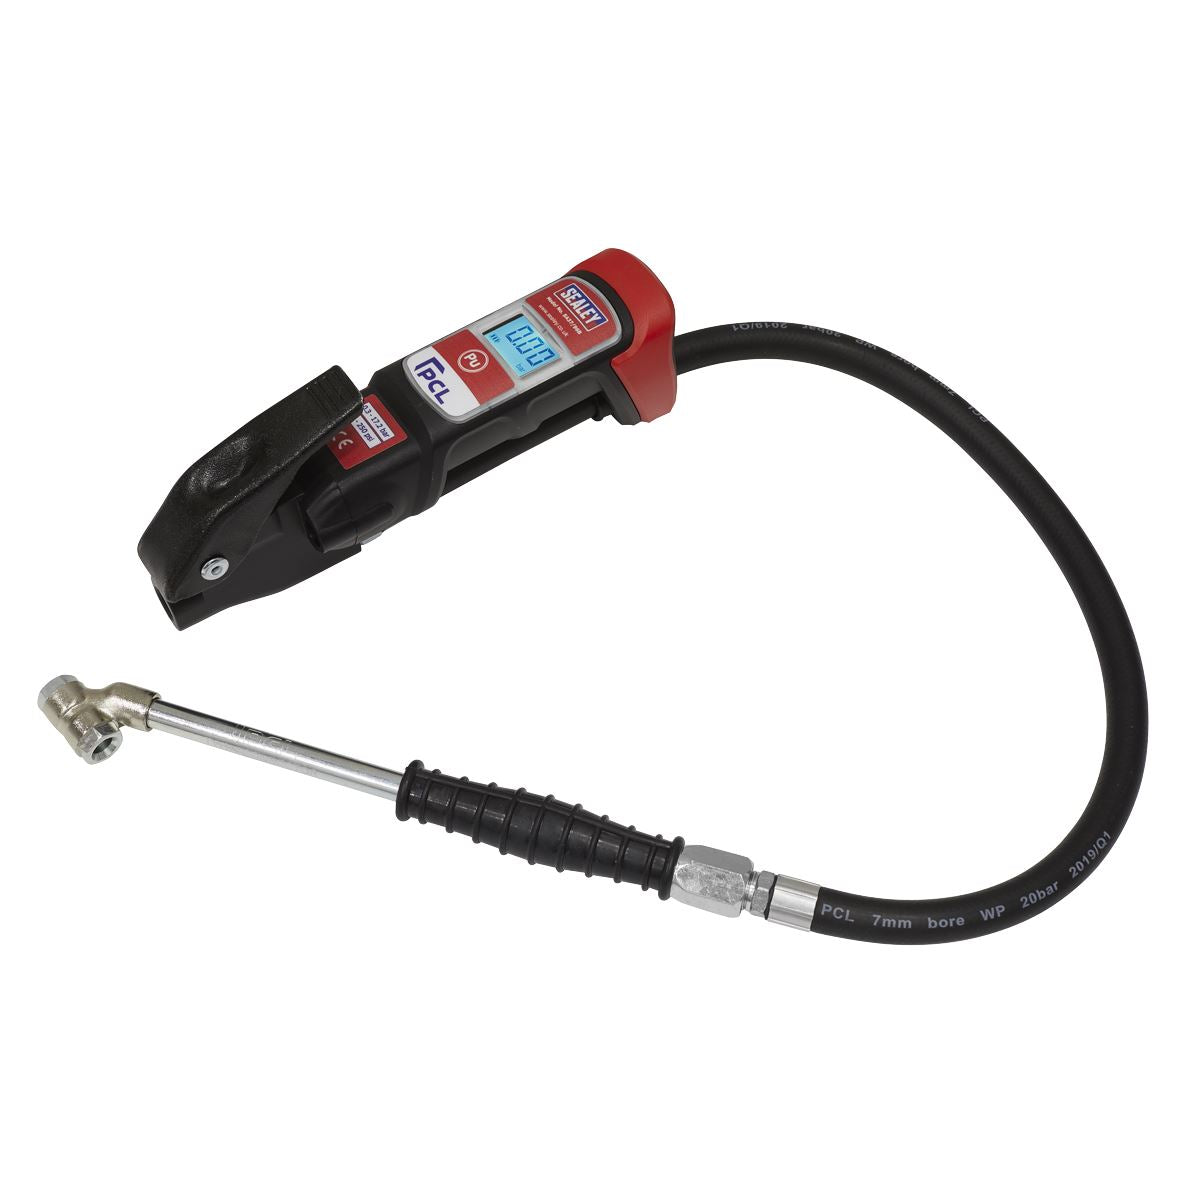 Sealey Premier - PCL Premier Anodised Digital Tyre Inflator with Twin Push-On Connector